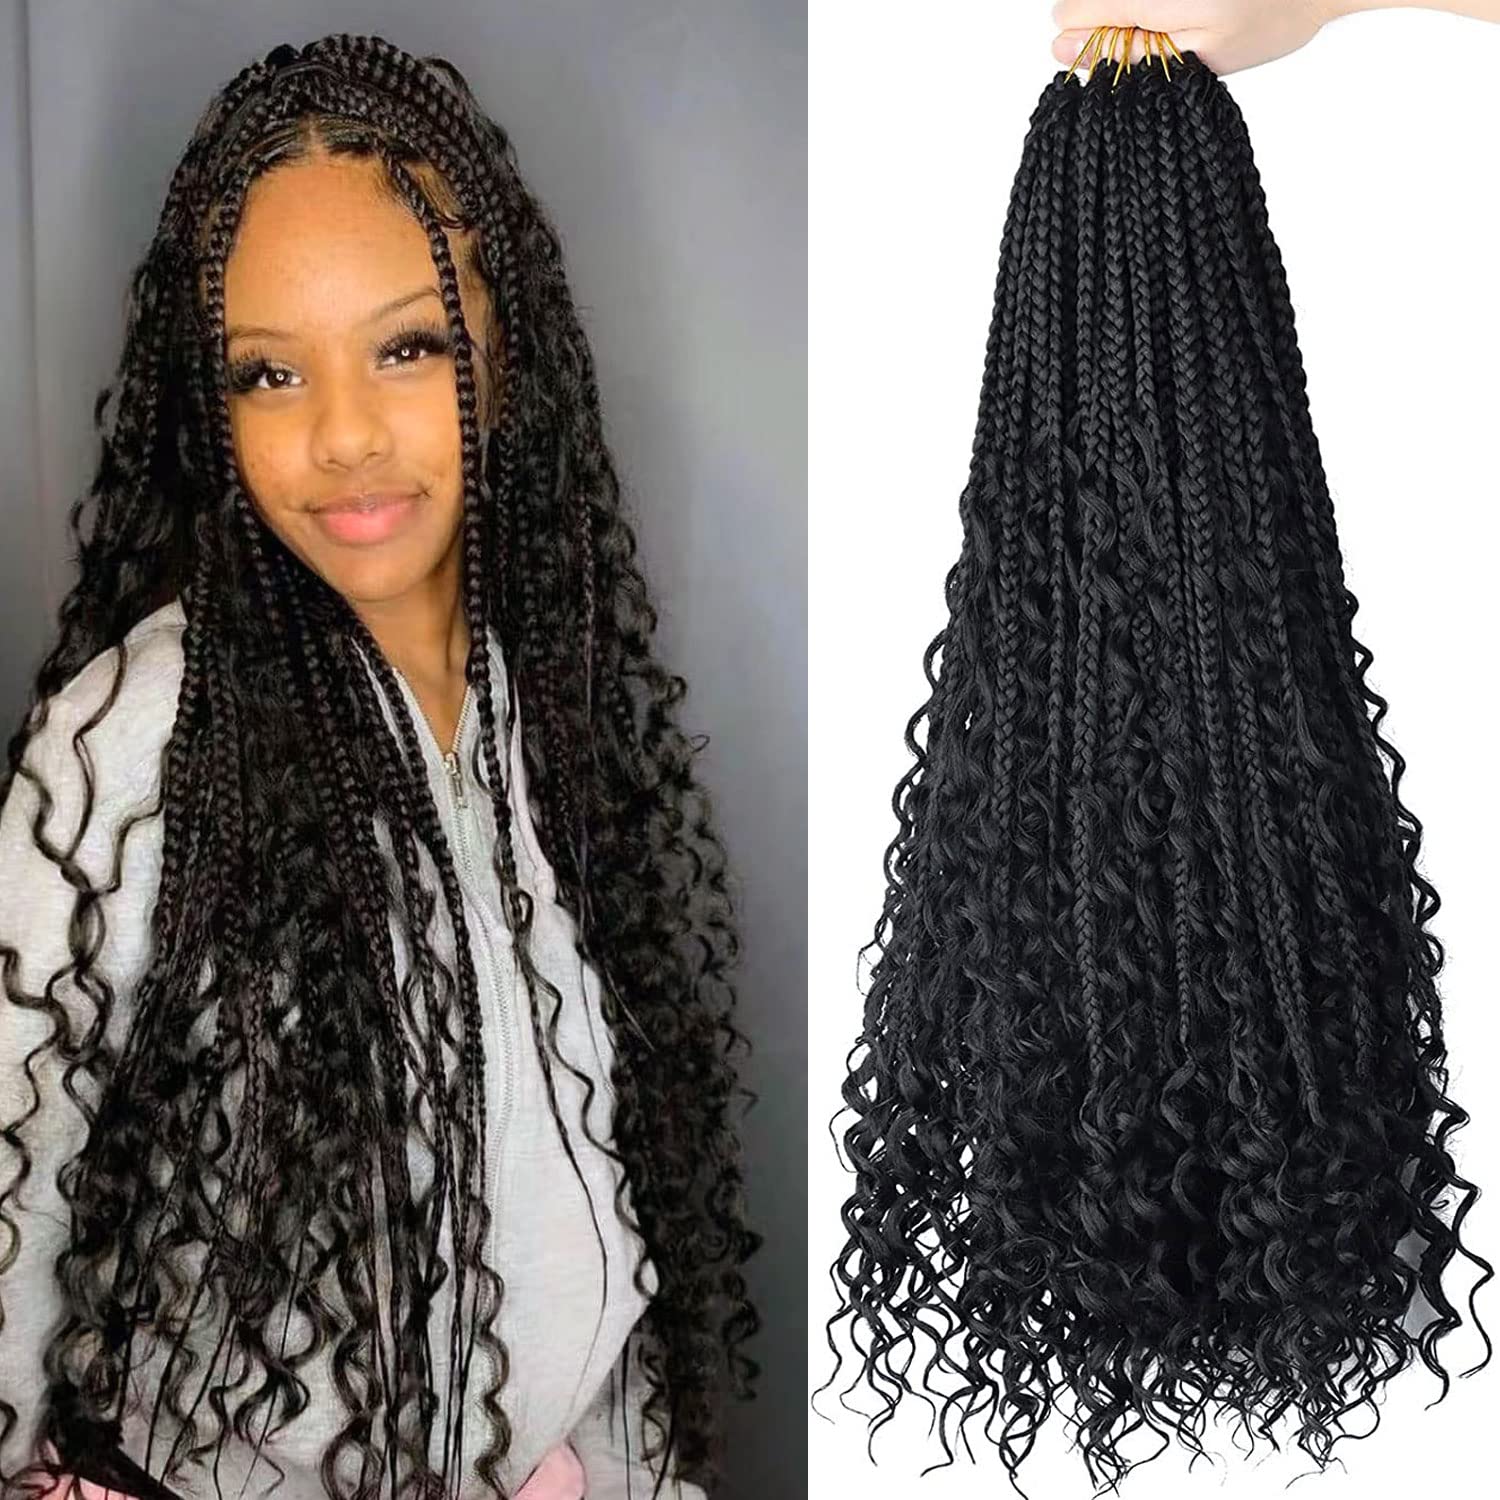 Leeven 8 Packs Wavy Senegalese Twist Crochet Hair with Curly Ends, 8 Inch  Black Pre Looped Short Crochet Braids, Pre Twisted Small Hanava Twist